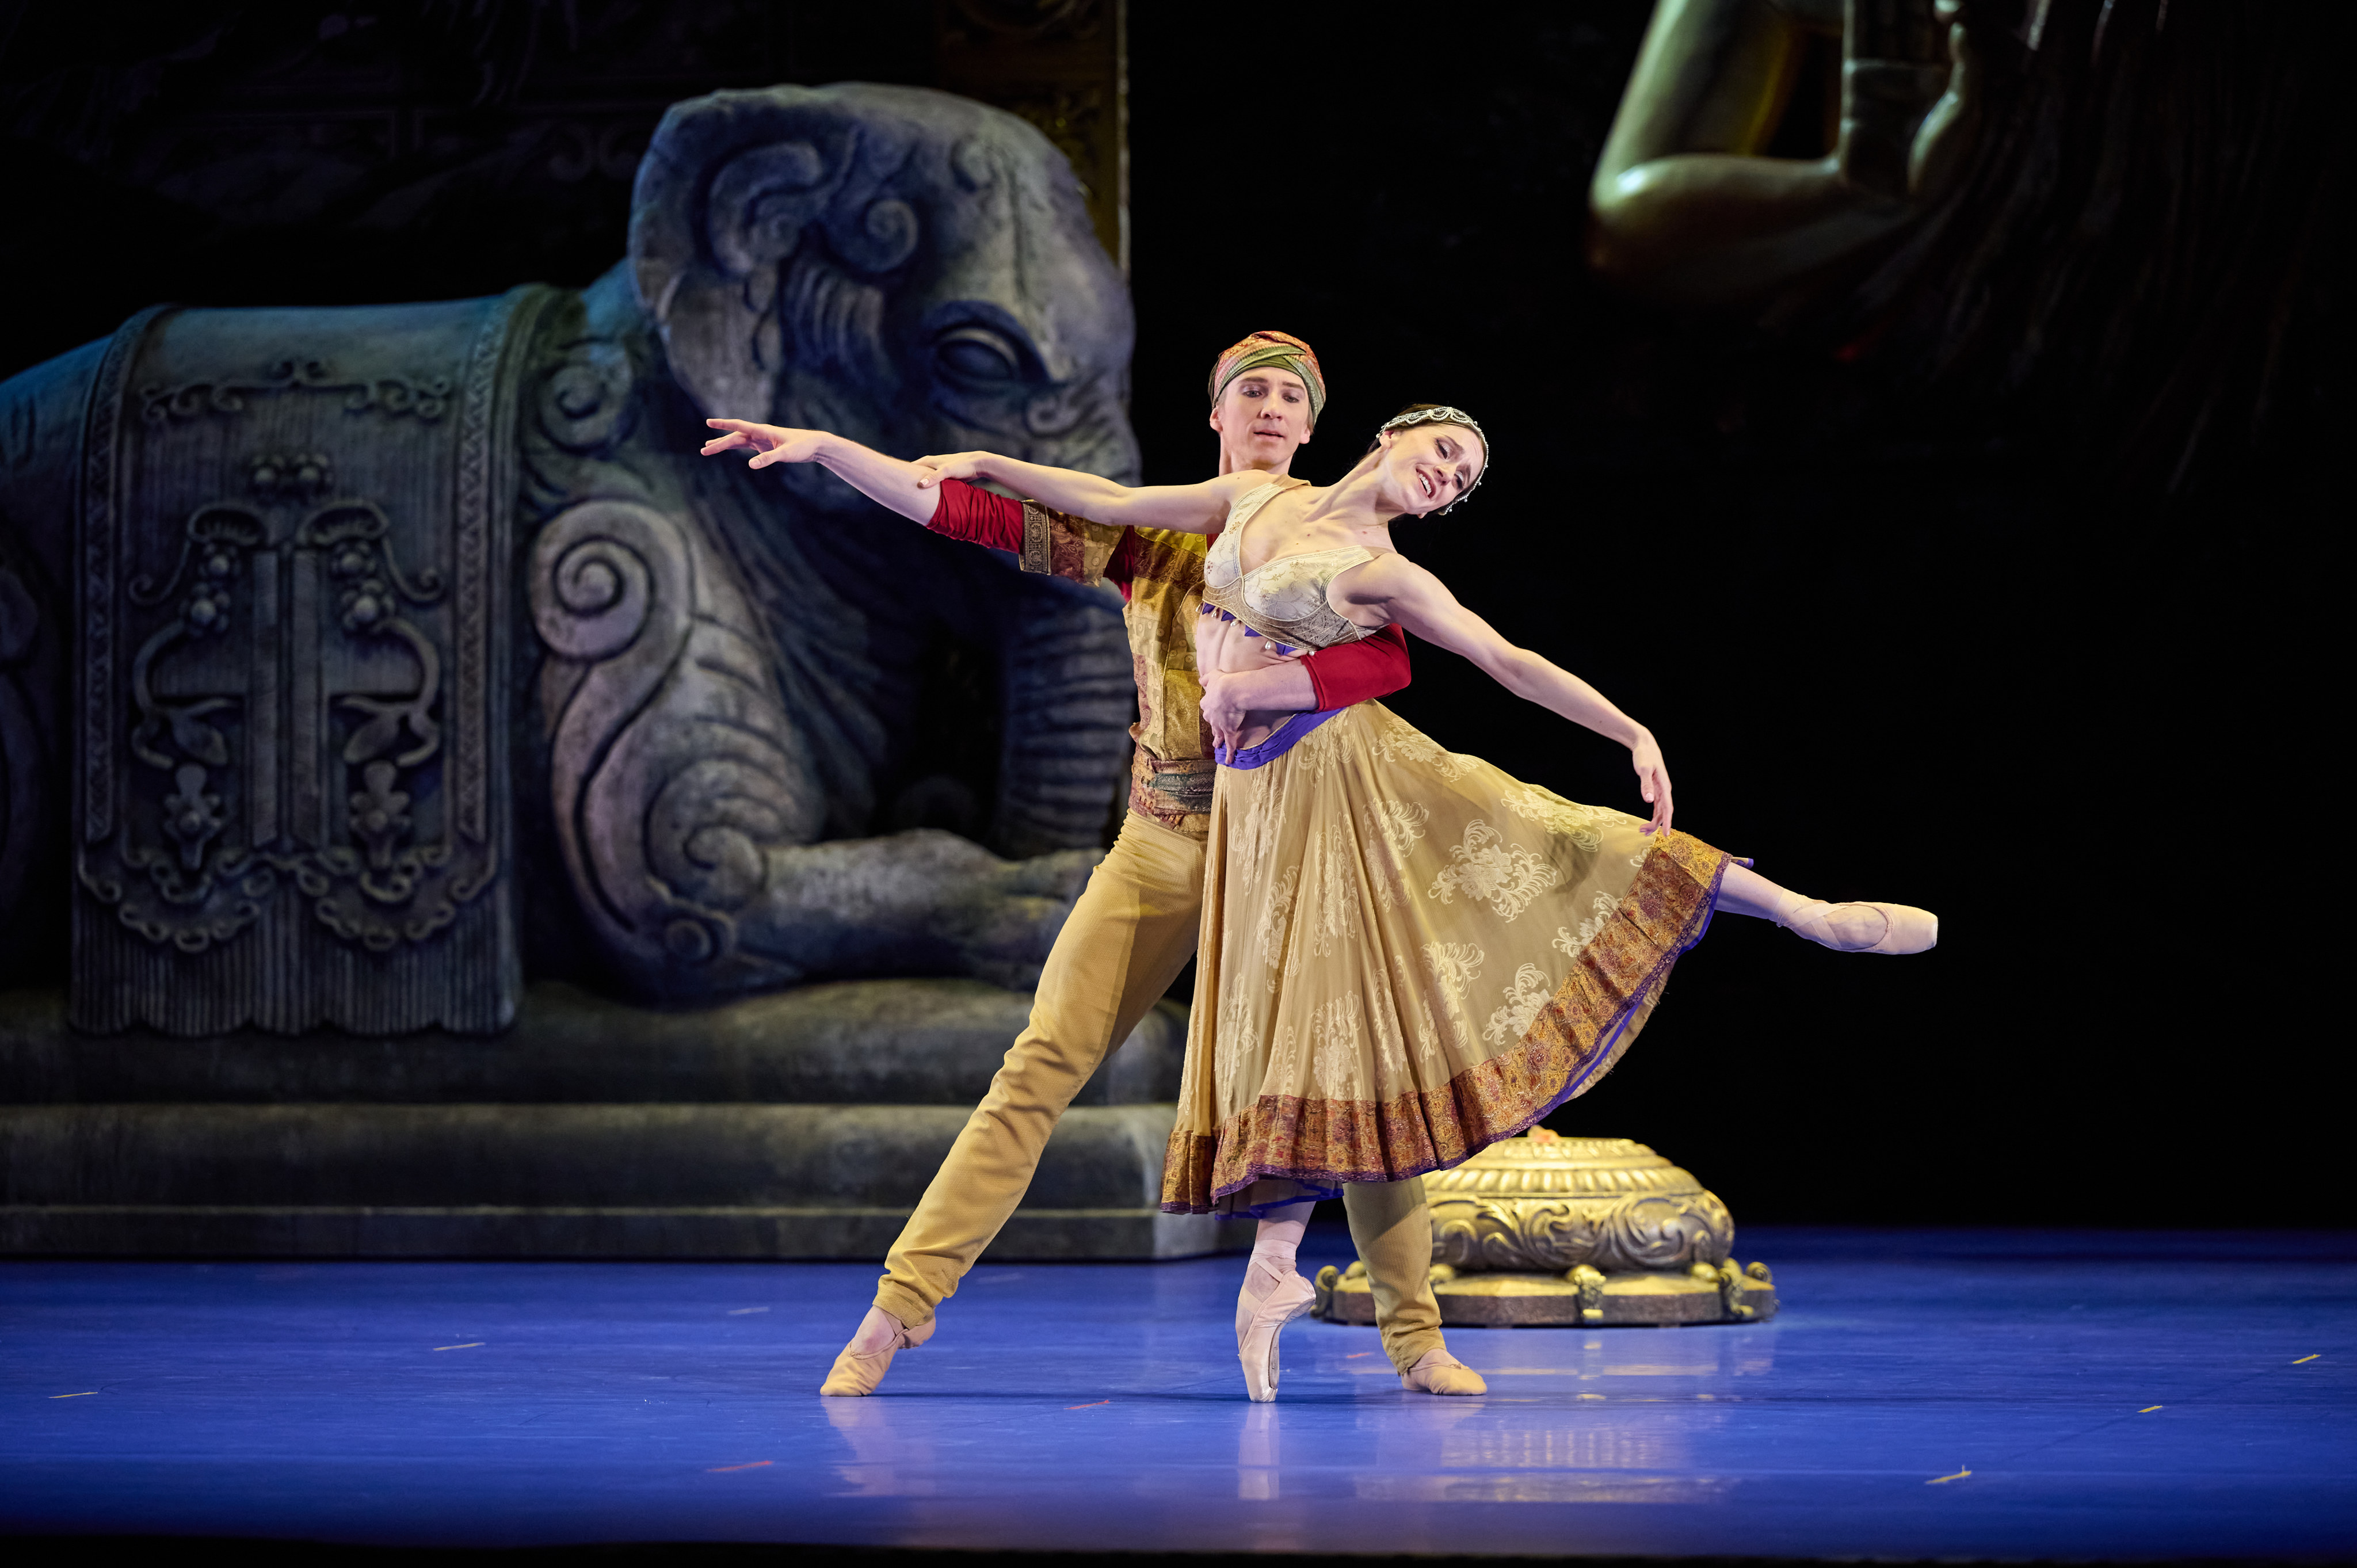 Marianela Nuñez (right) and Vadim Muntagirov of the Royal Ballet shone in Hong Kong Ballet’s La Bayadère – a production that highlighted the company’s own lack of depth but ended on a high. Photo: Hong Kong Ballet/Conrad Dy-Liacco